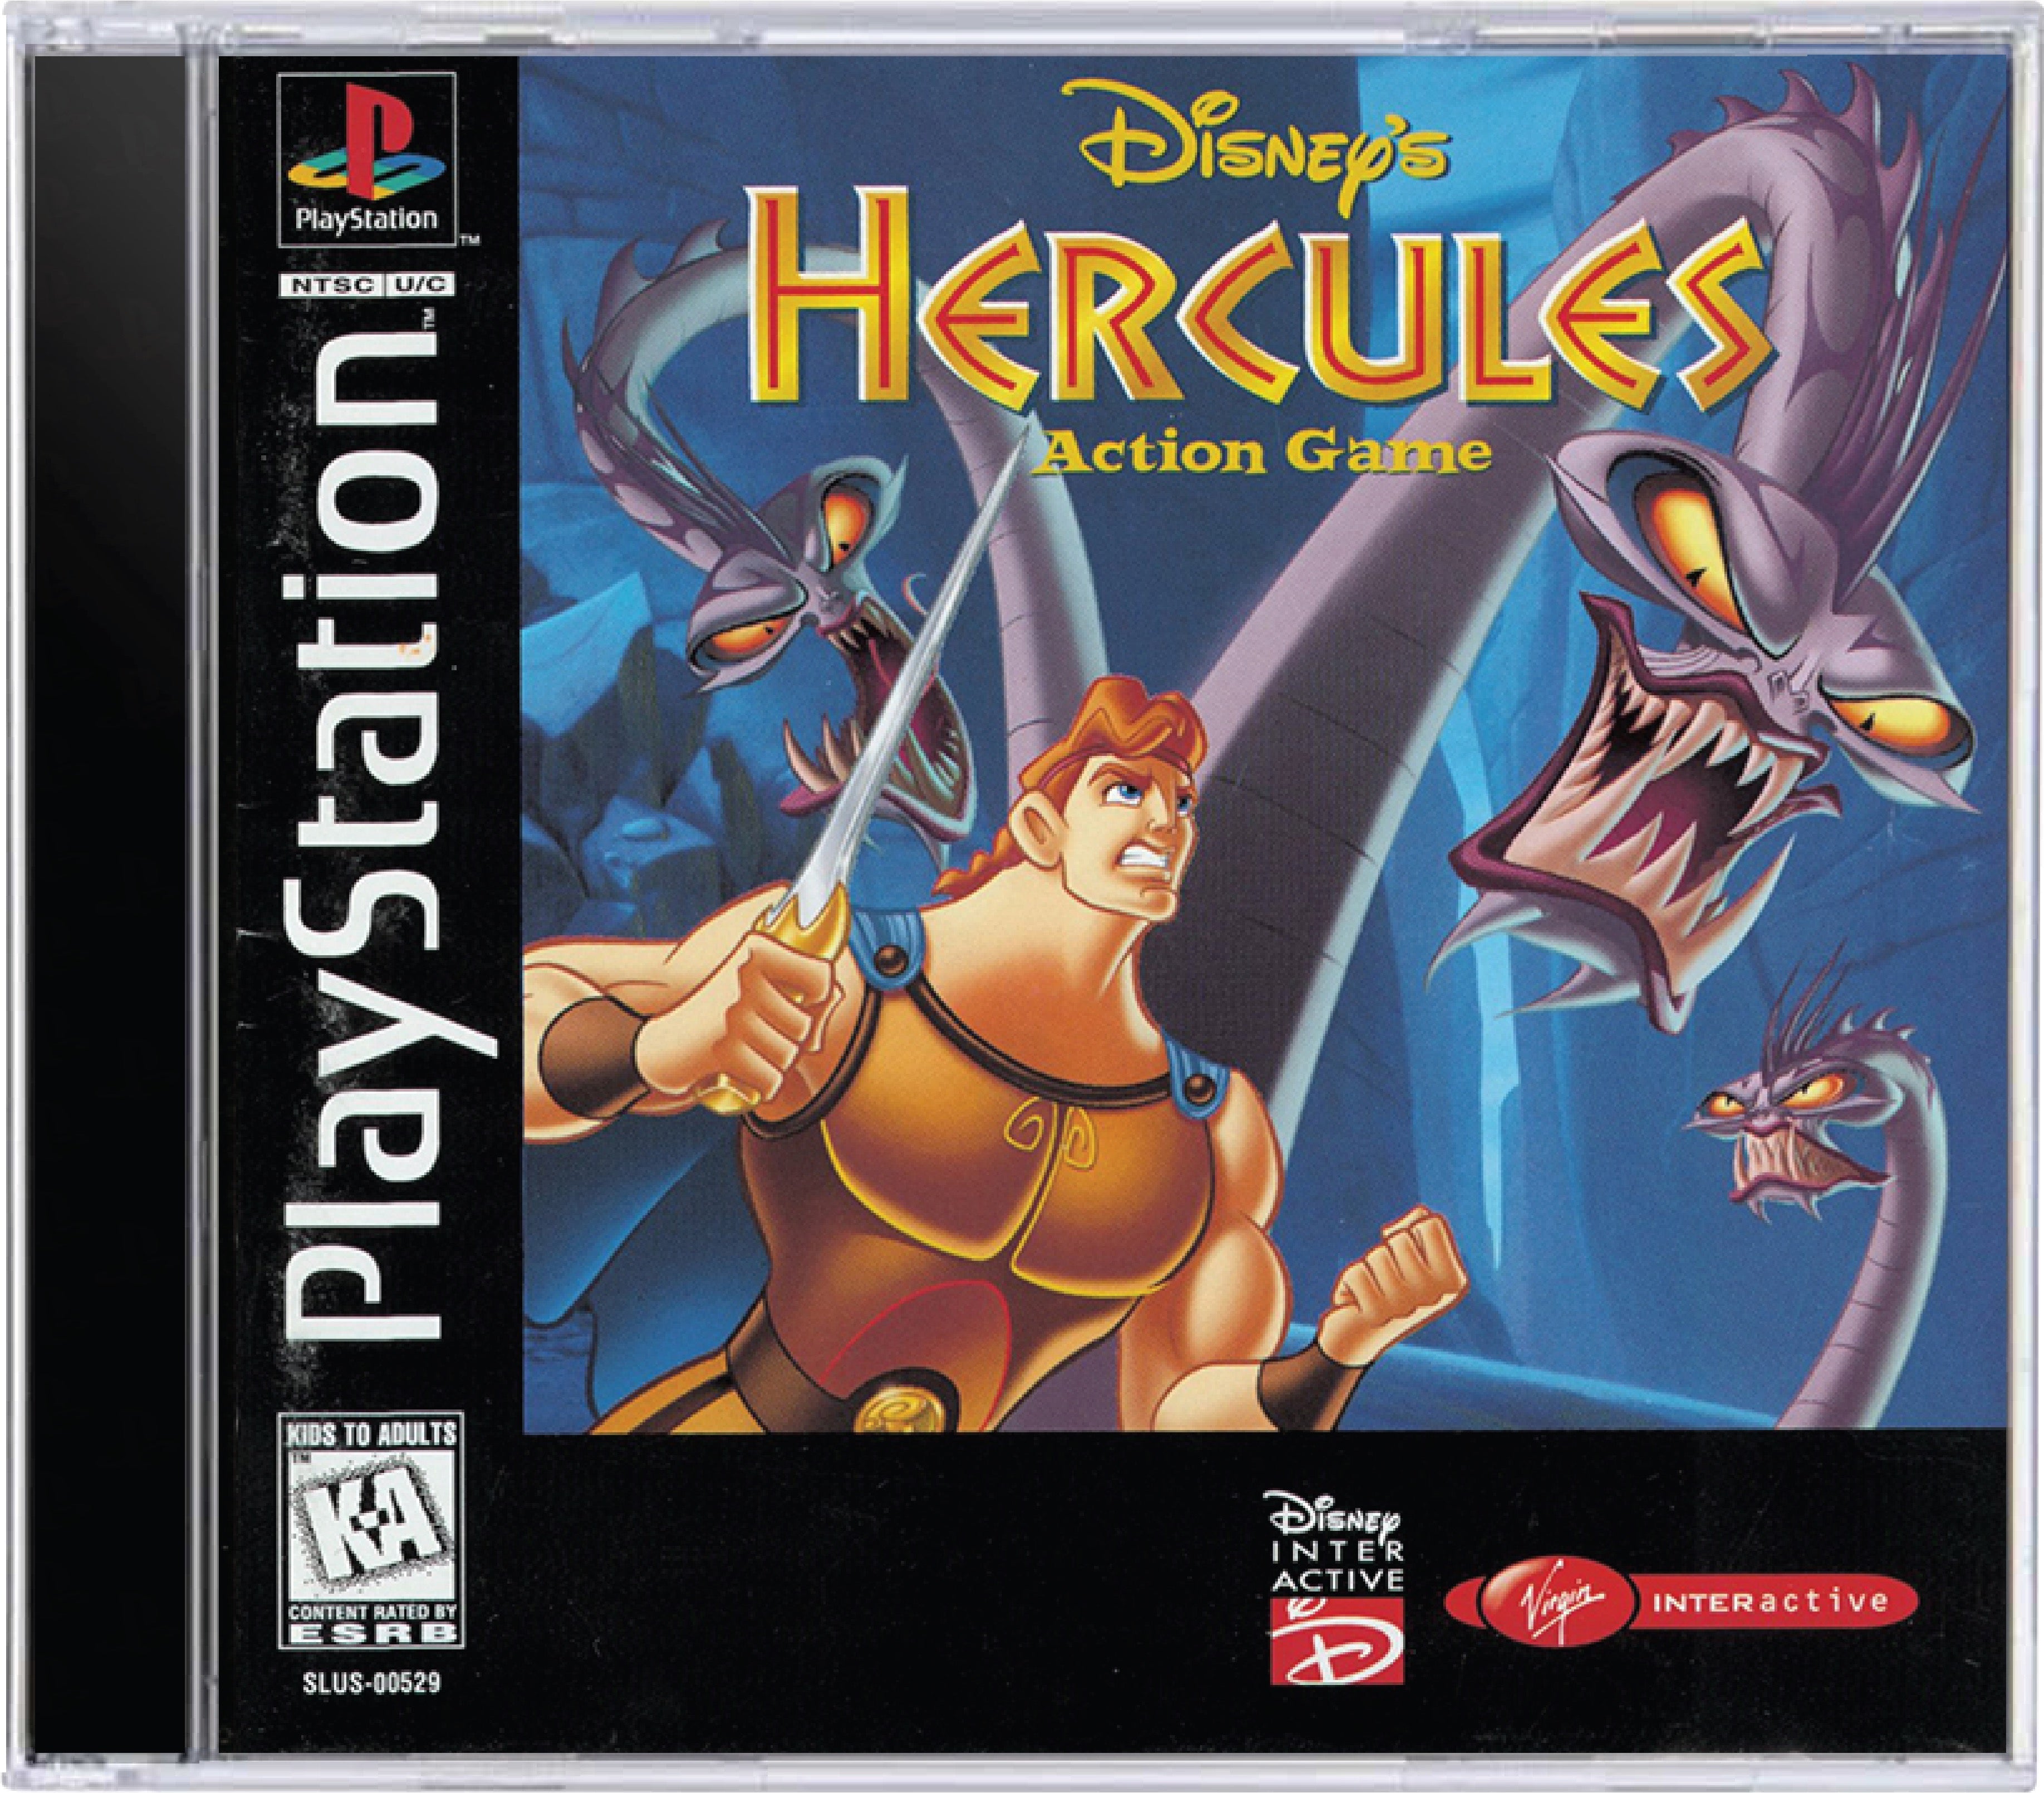 Hercules Cover Art and Product Photo